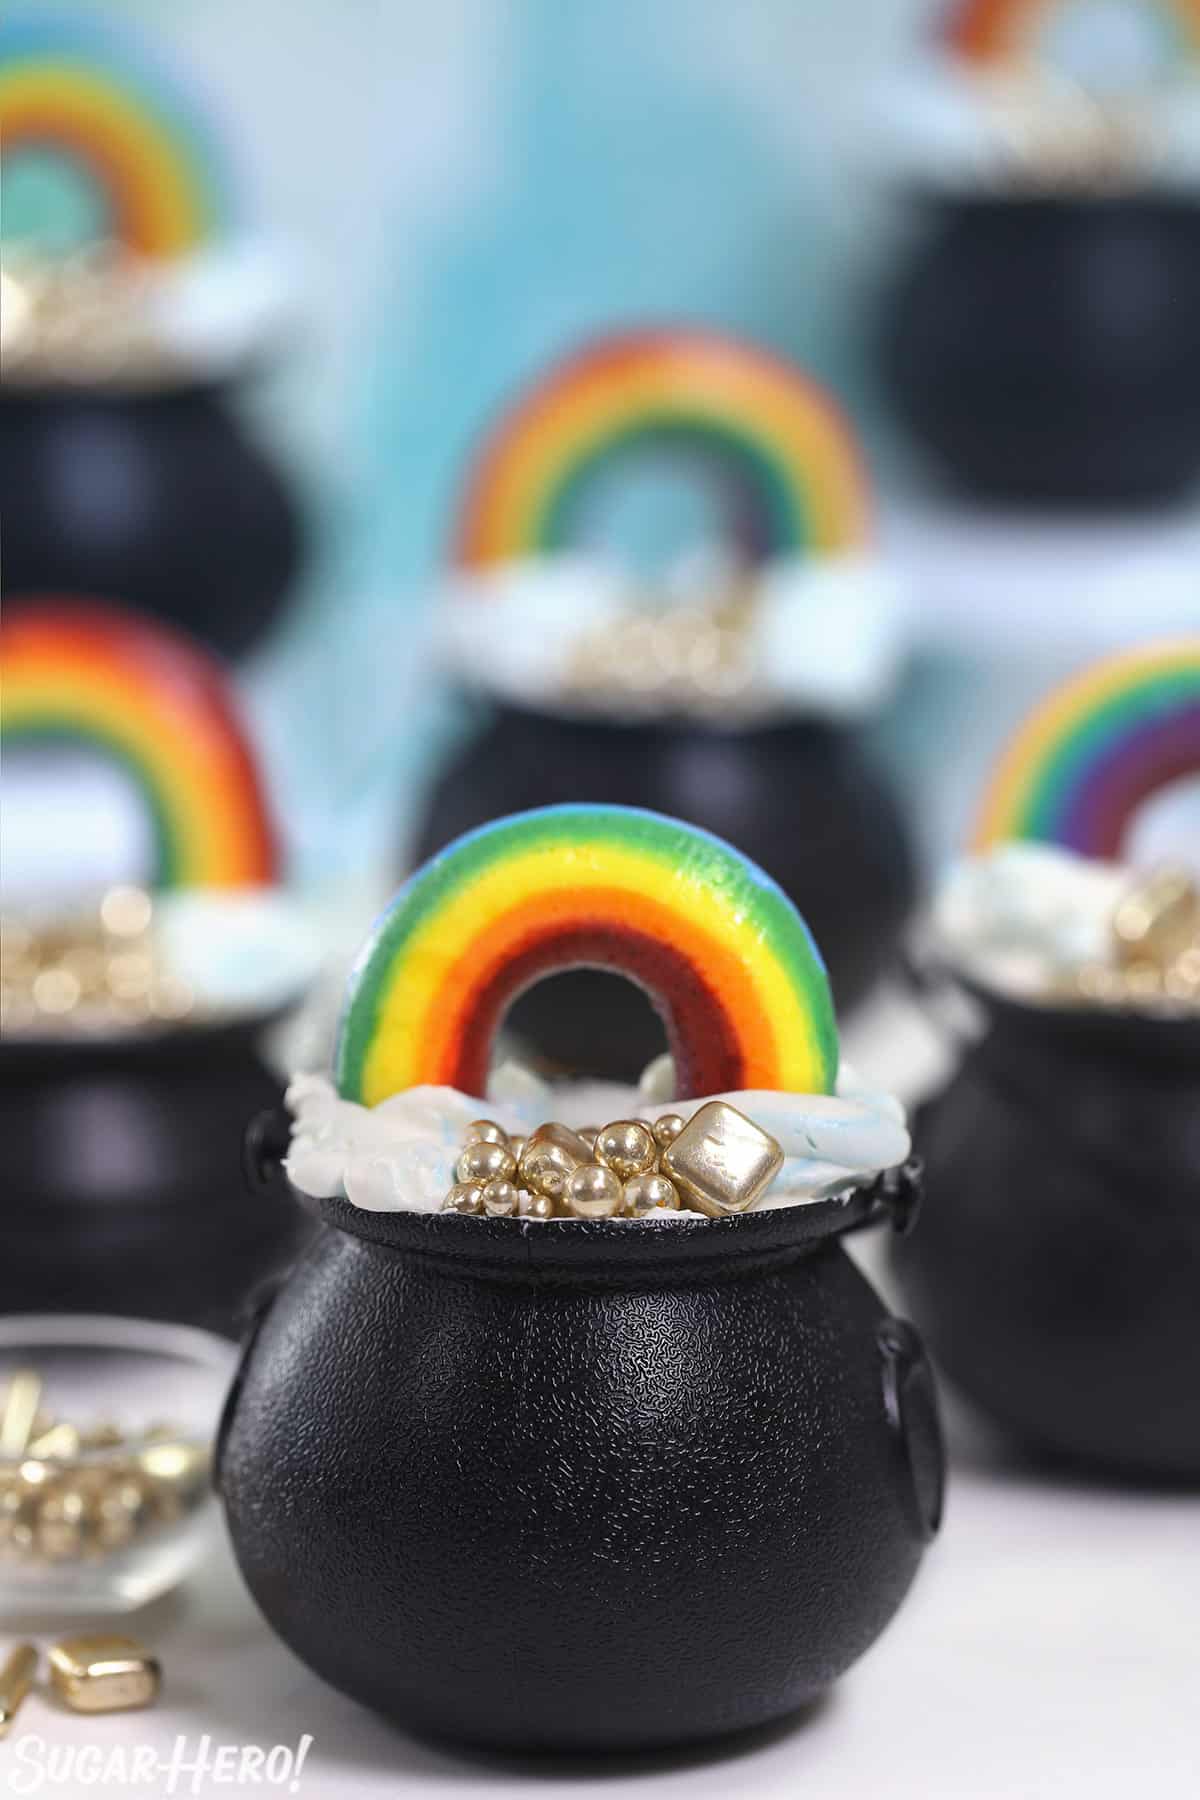 Group of Pot of Gold Cupcakes on a white surface with a blue cloud background.